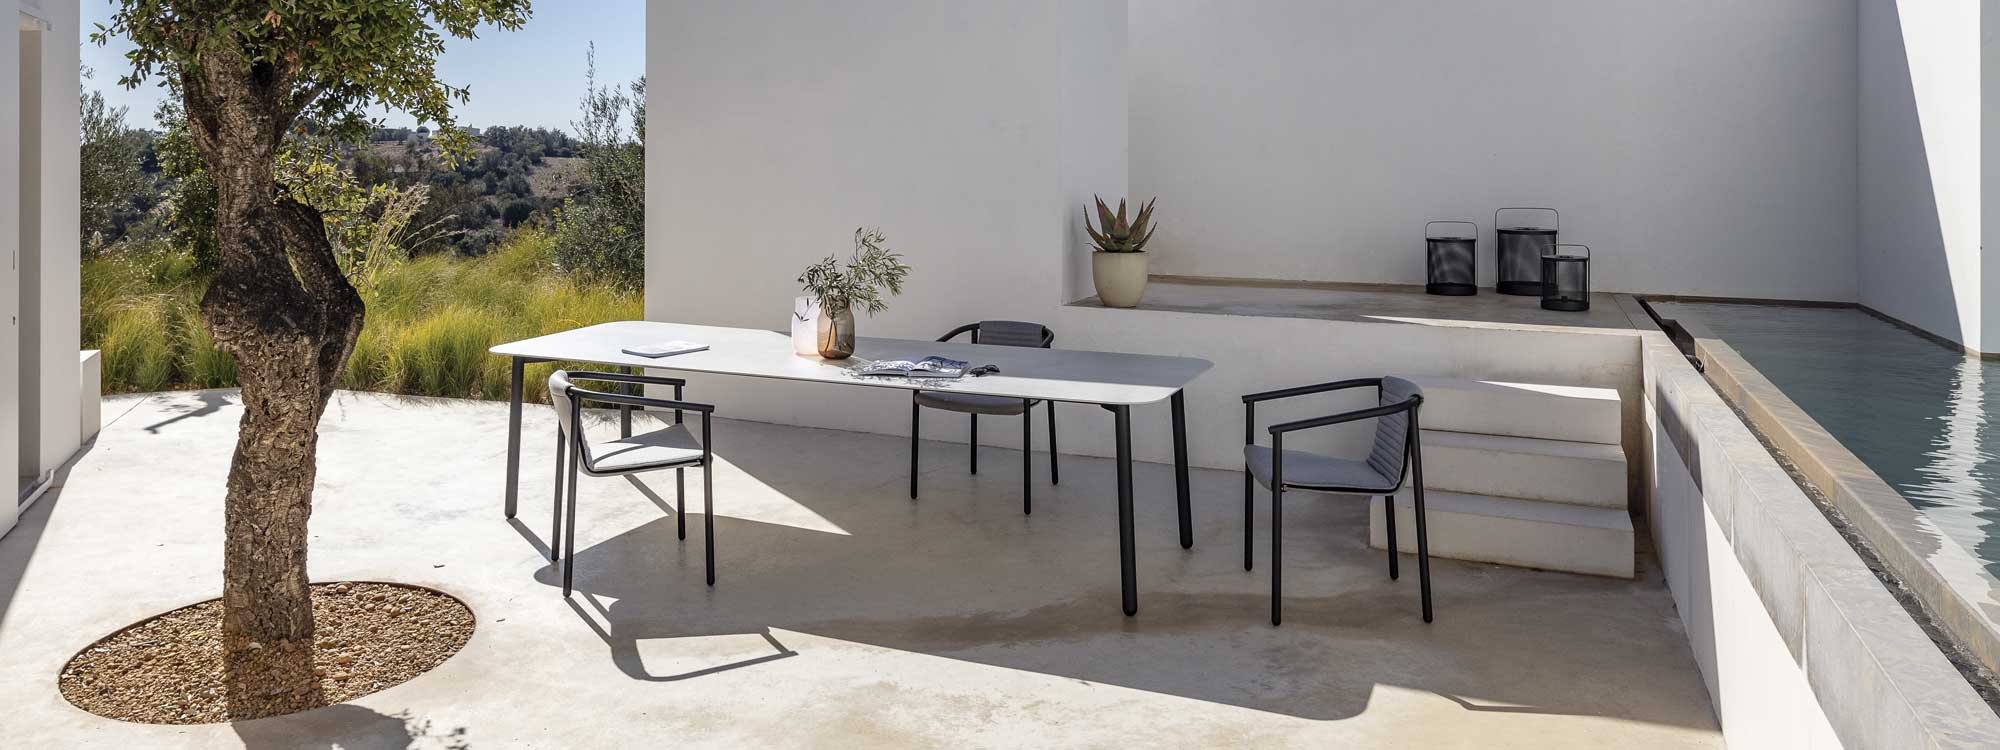 Image of Duct Round garden chair with Starling exterior dining table on minimalist poured concrete terrace